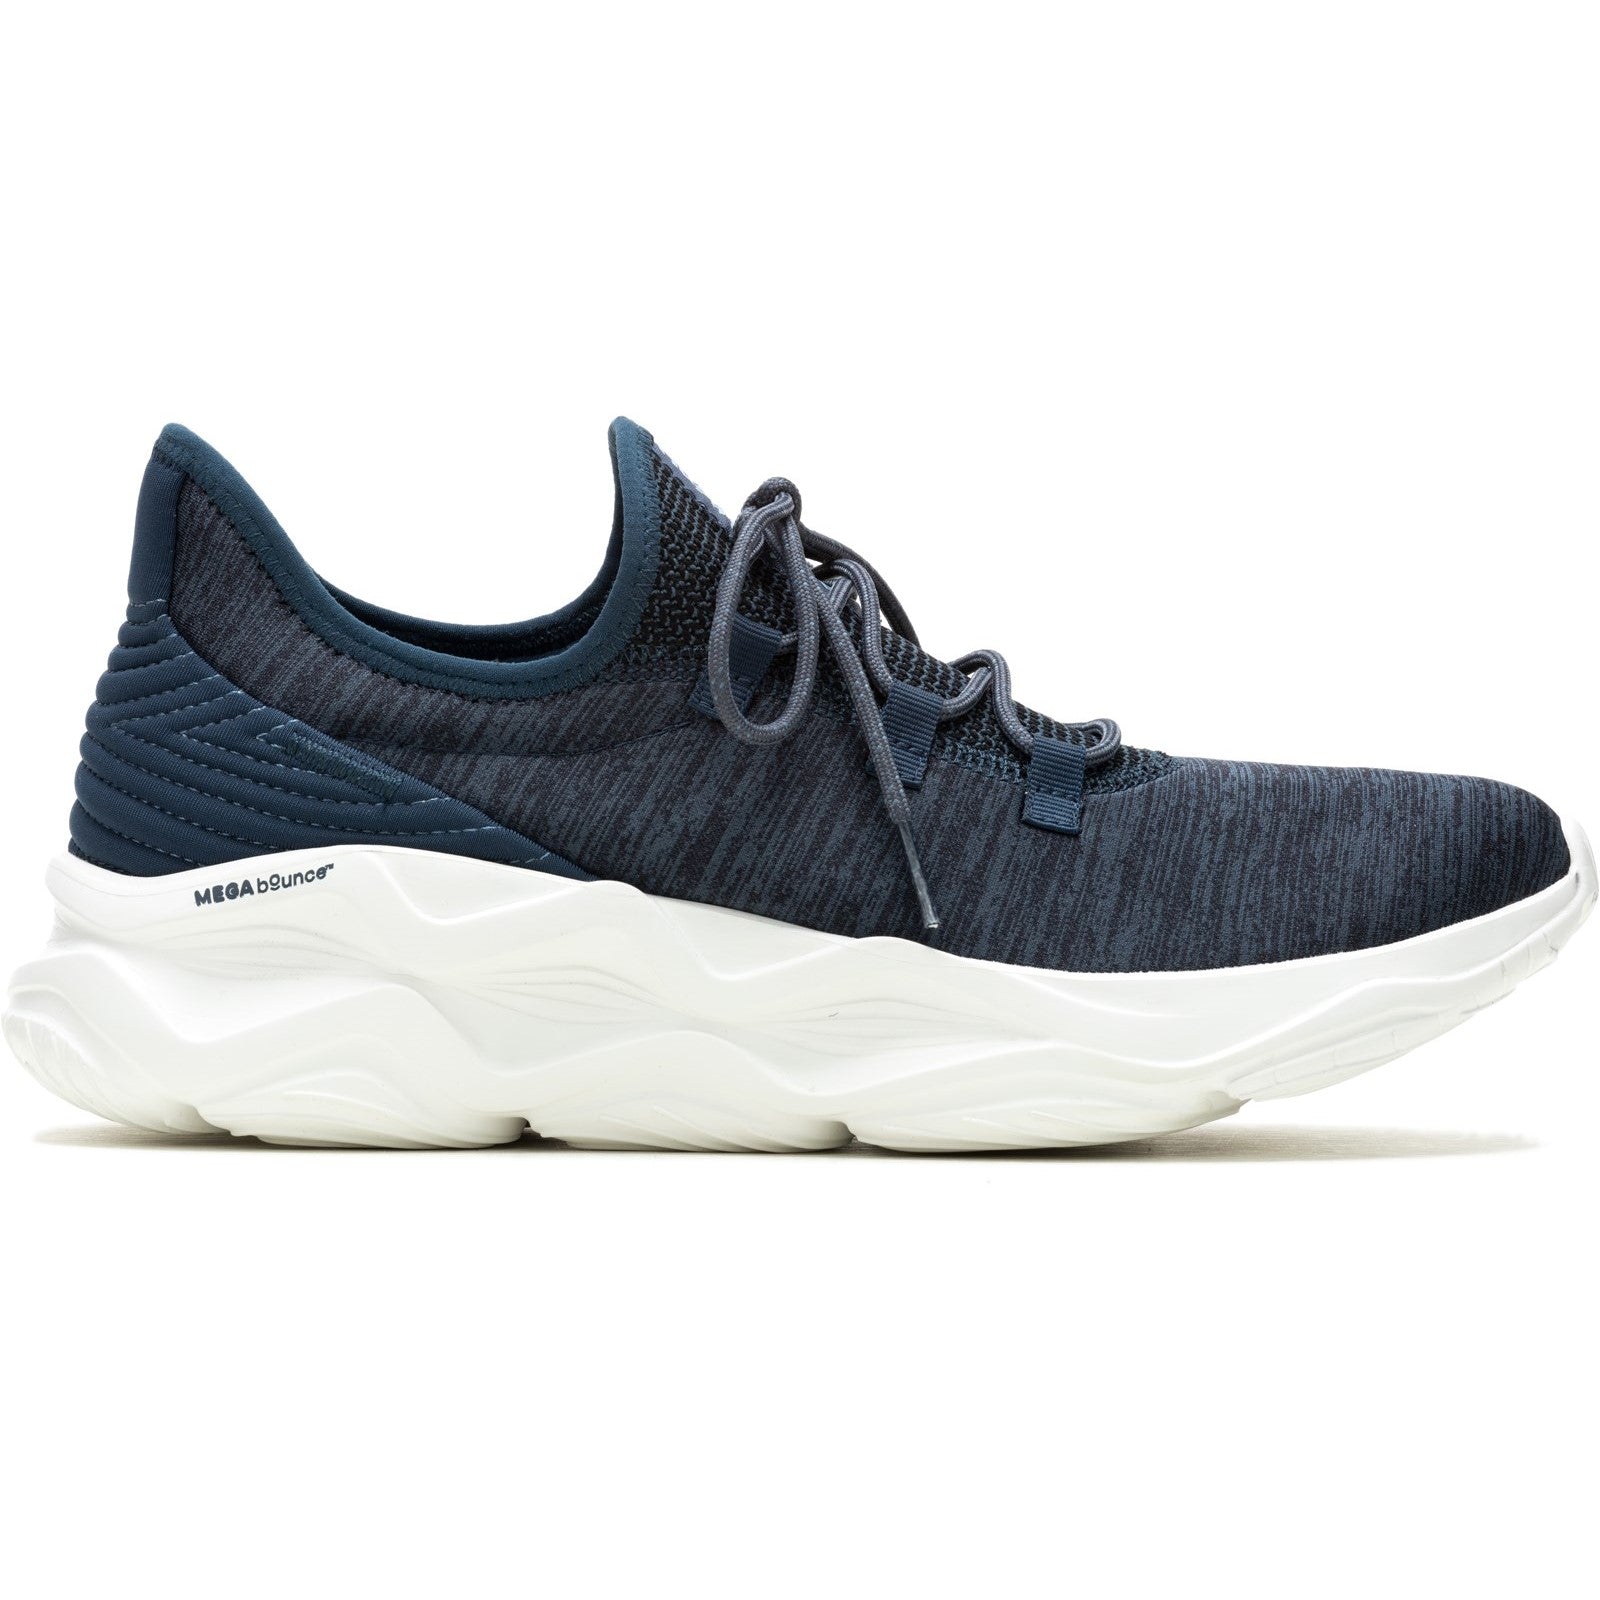 Hush Puppies Mens Charge Sneaker - Navy